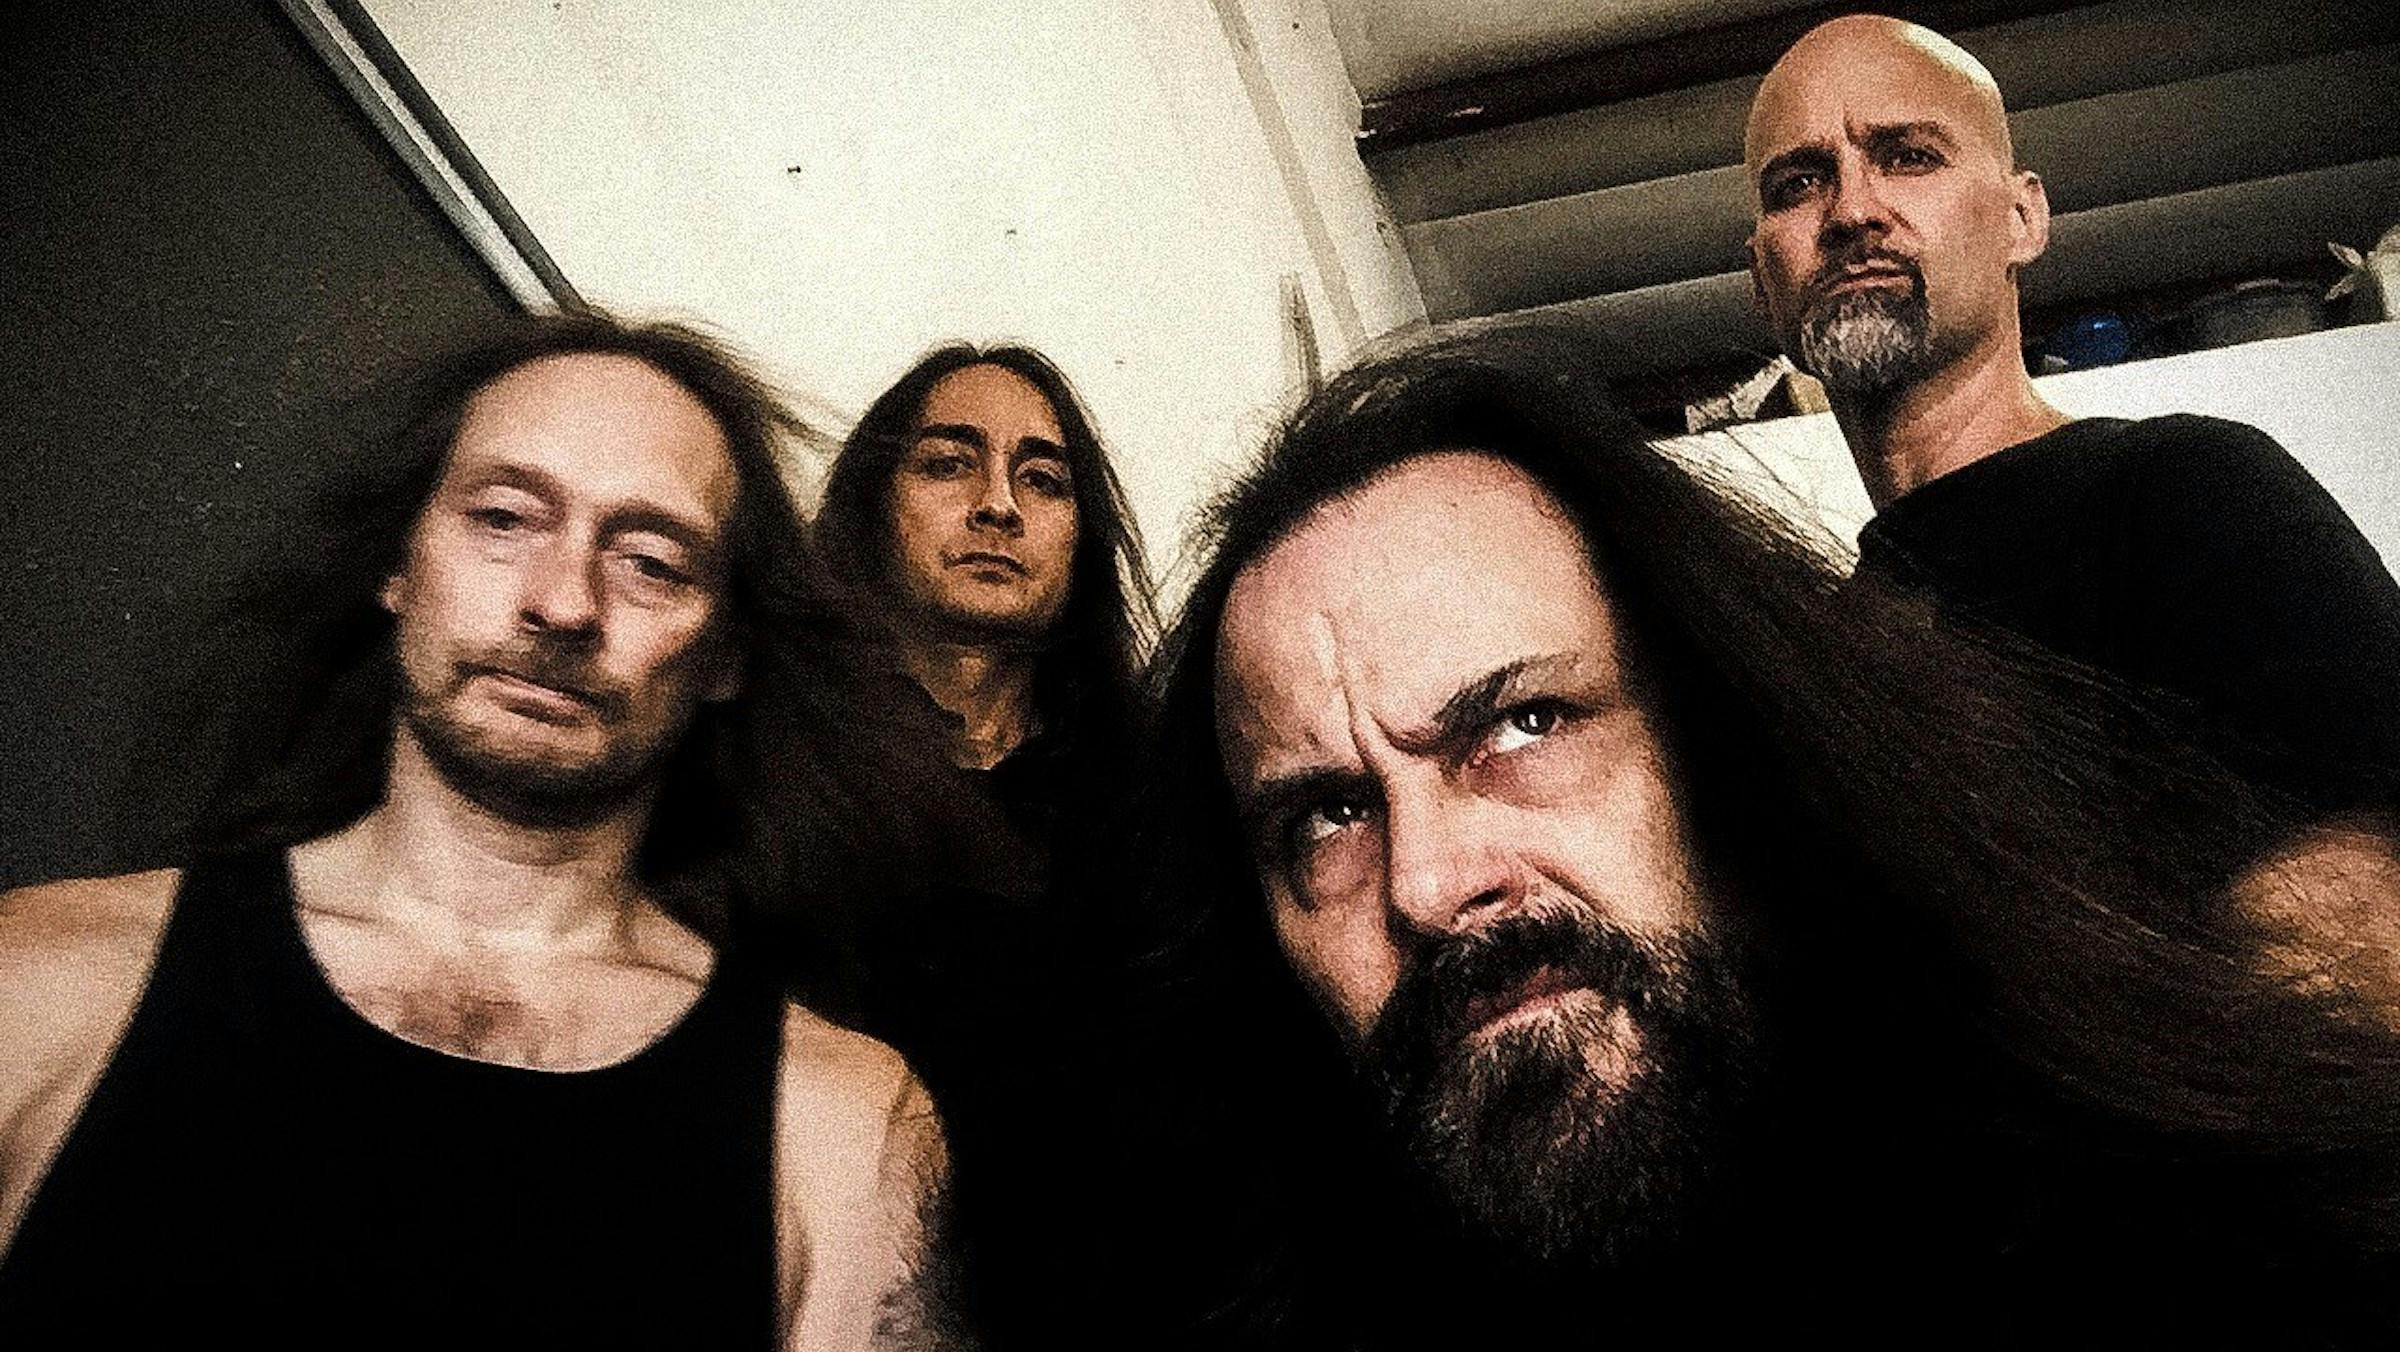 Deicide Announce U.S. Tour With Origin, Jungle Rot, And The Absence